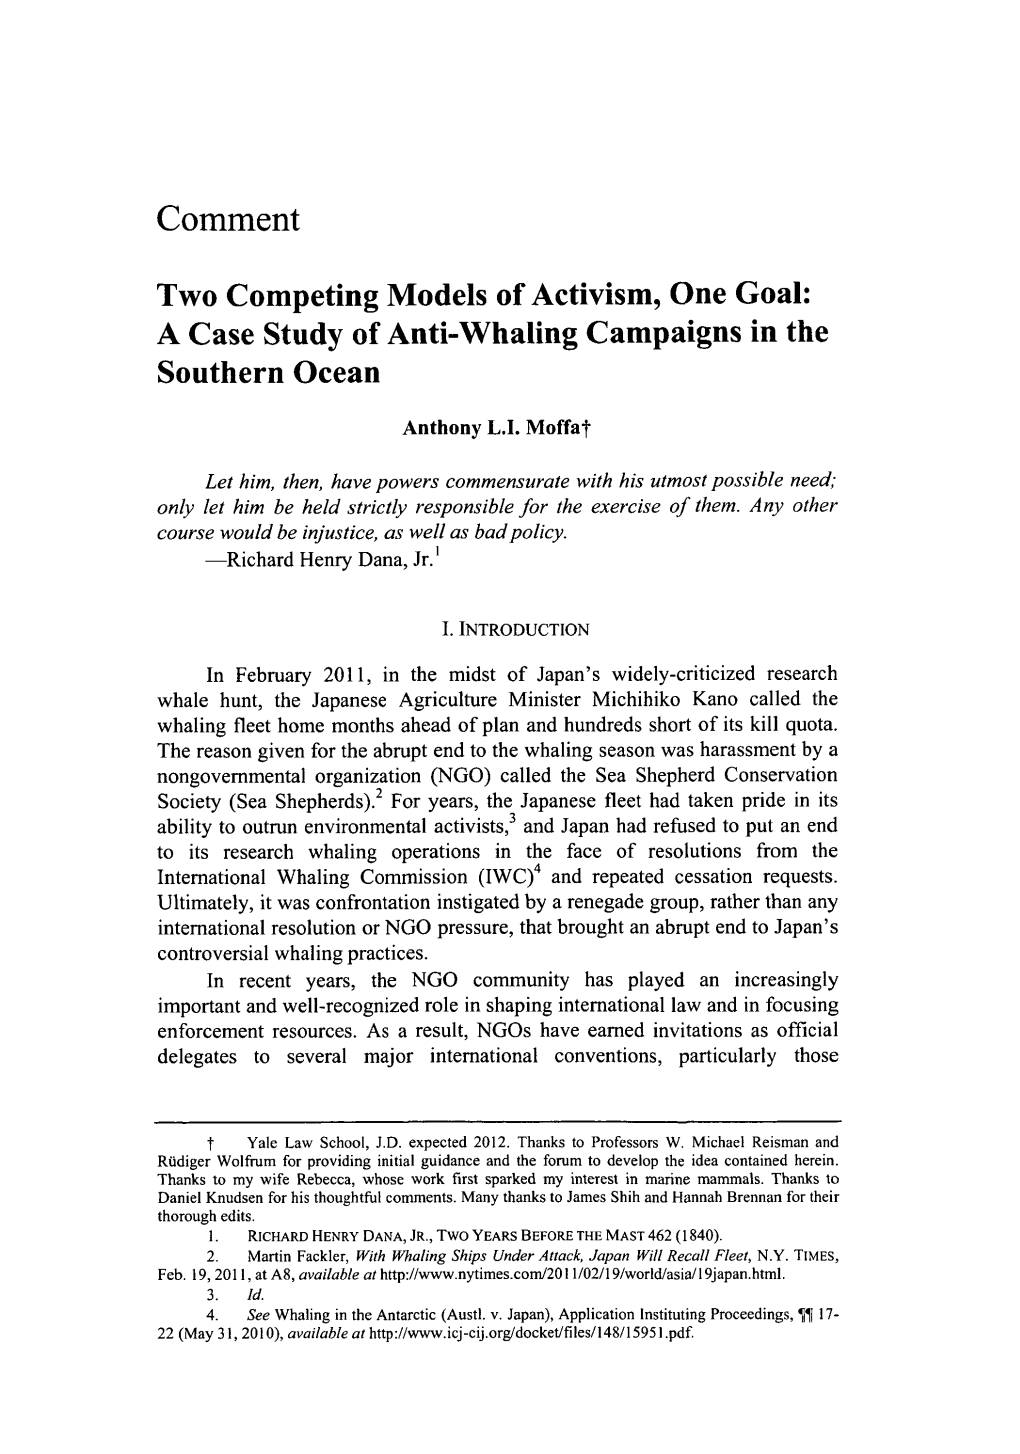 Two Competing Models of Activism, One Goal: a Case Study of Anti-Whaling Campaigns in the Southern Ocean